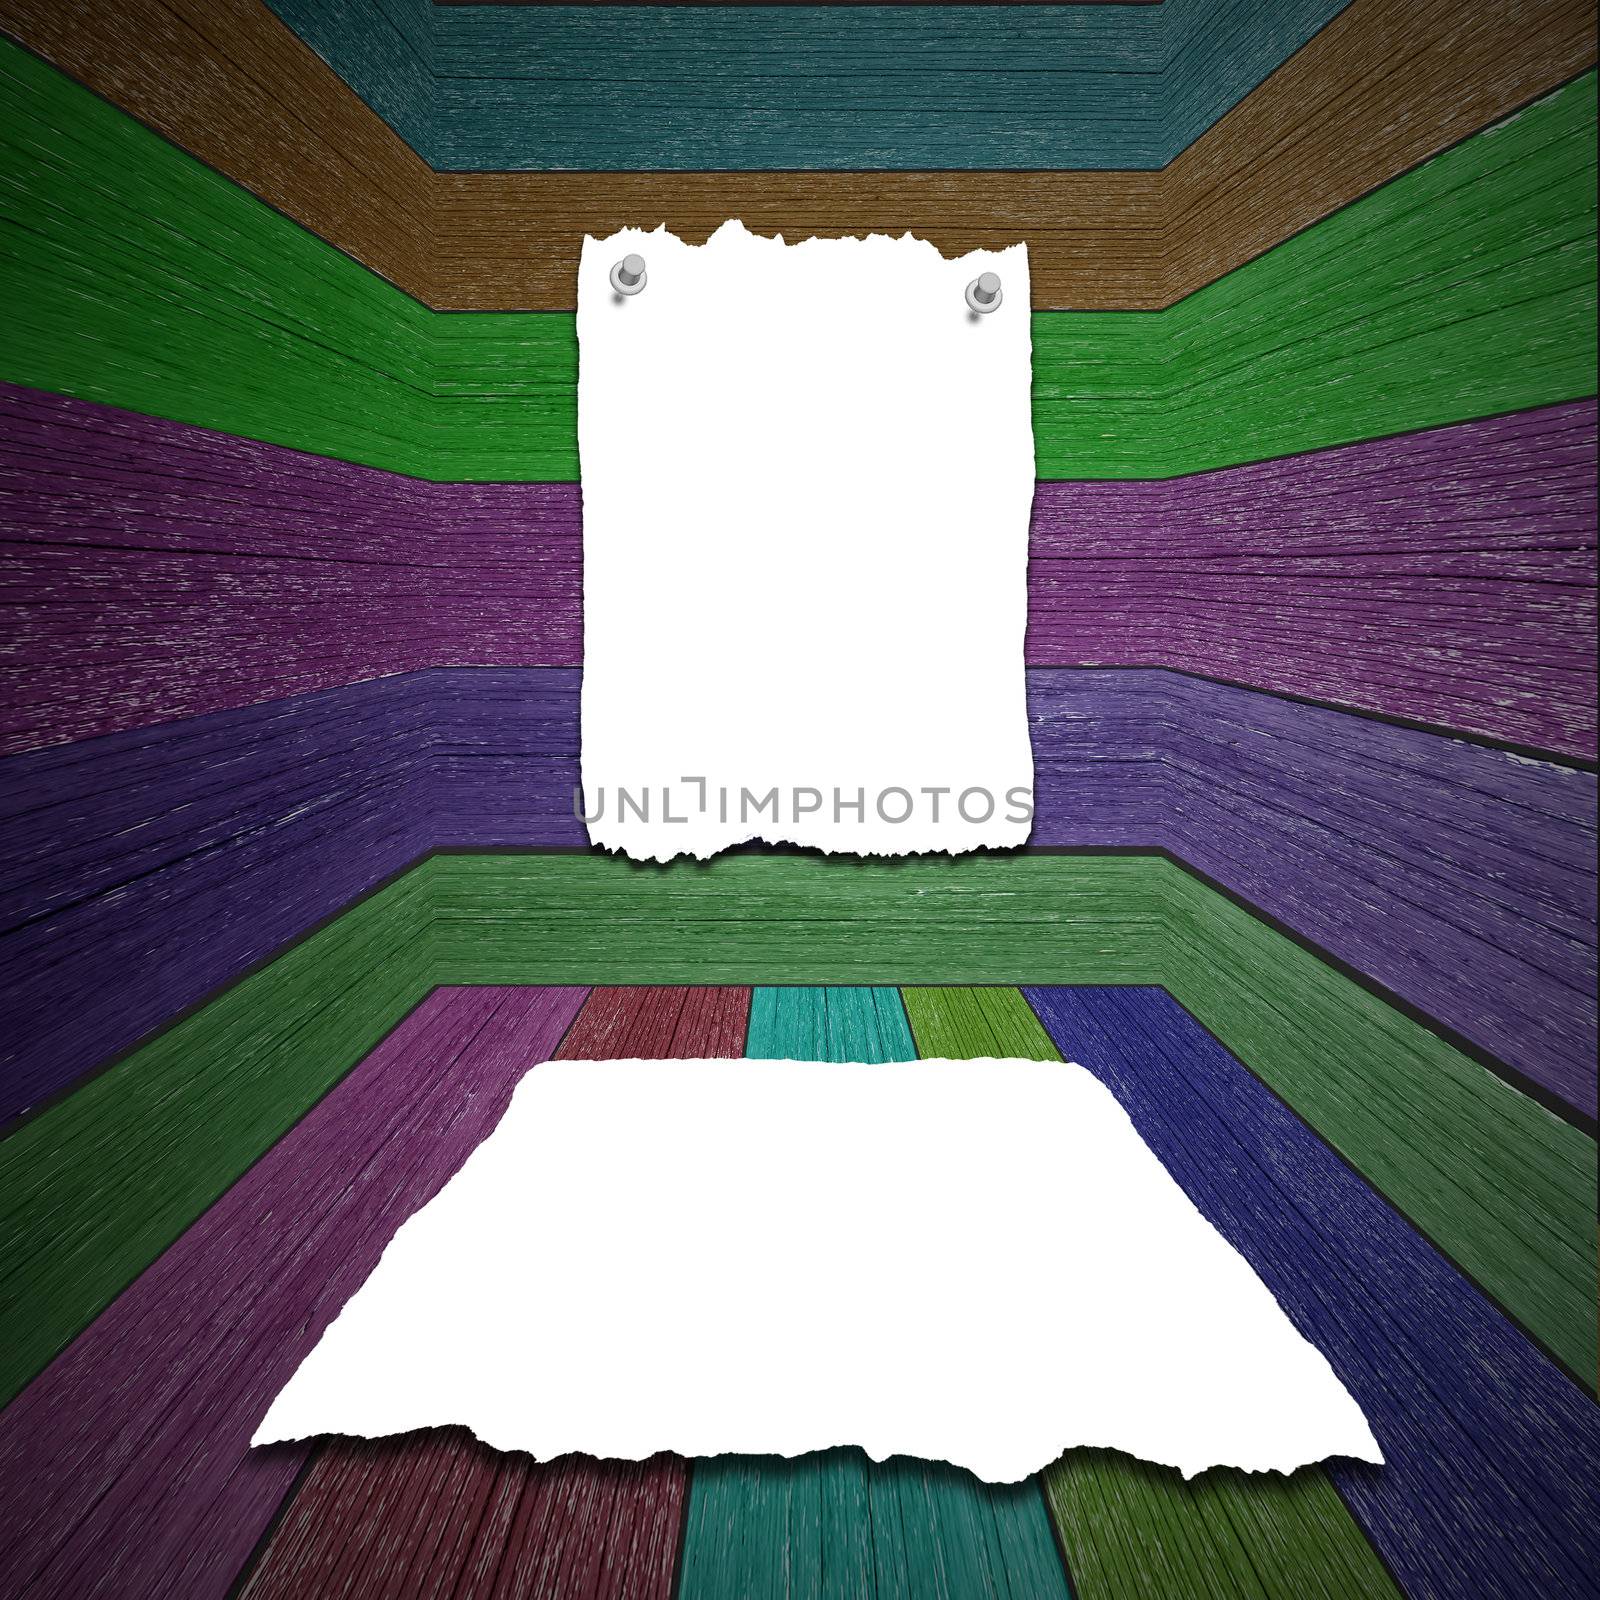 White blank paper on wood background